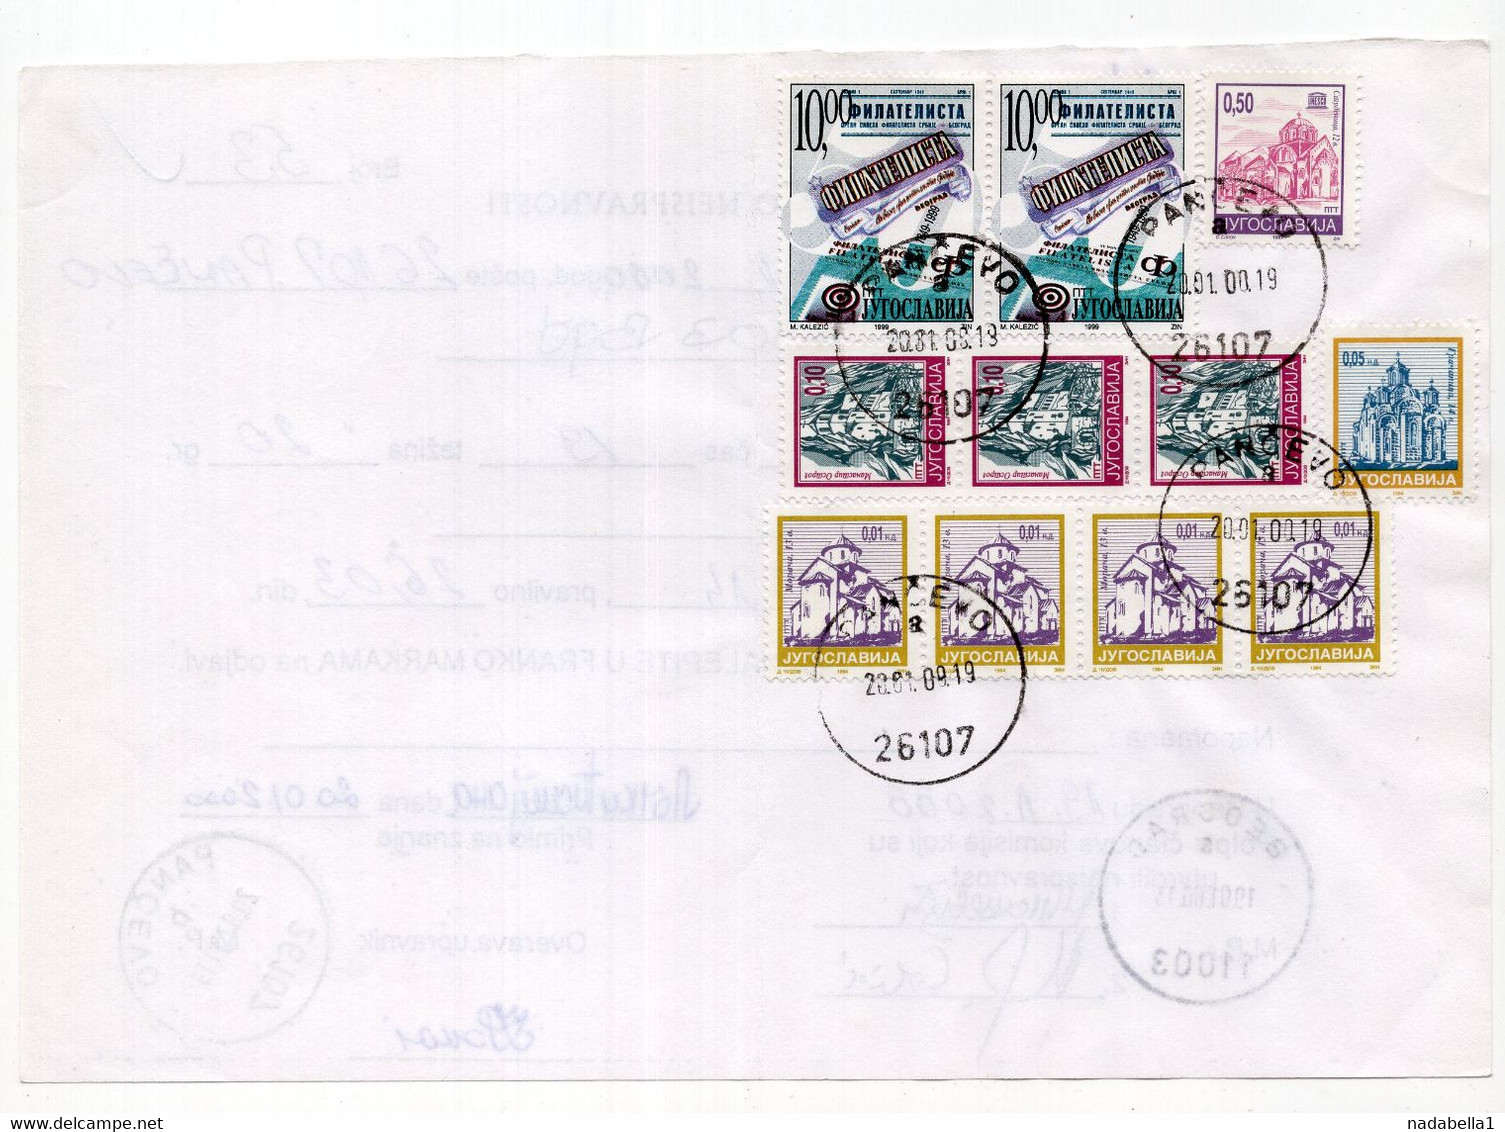 2000. YUGOSLAVIA,SERBIA,PANCEVO,NOTE OF MISSING FRANKING,20.89 DIN FRANKING AT THE BACK - Lettres & Documents